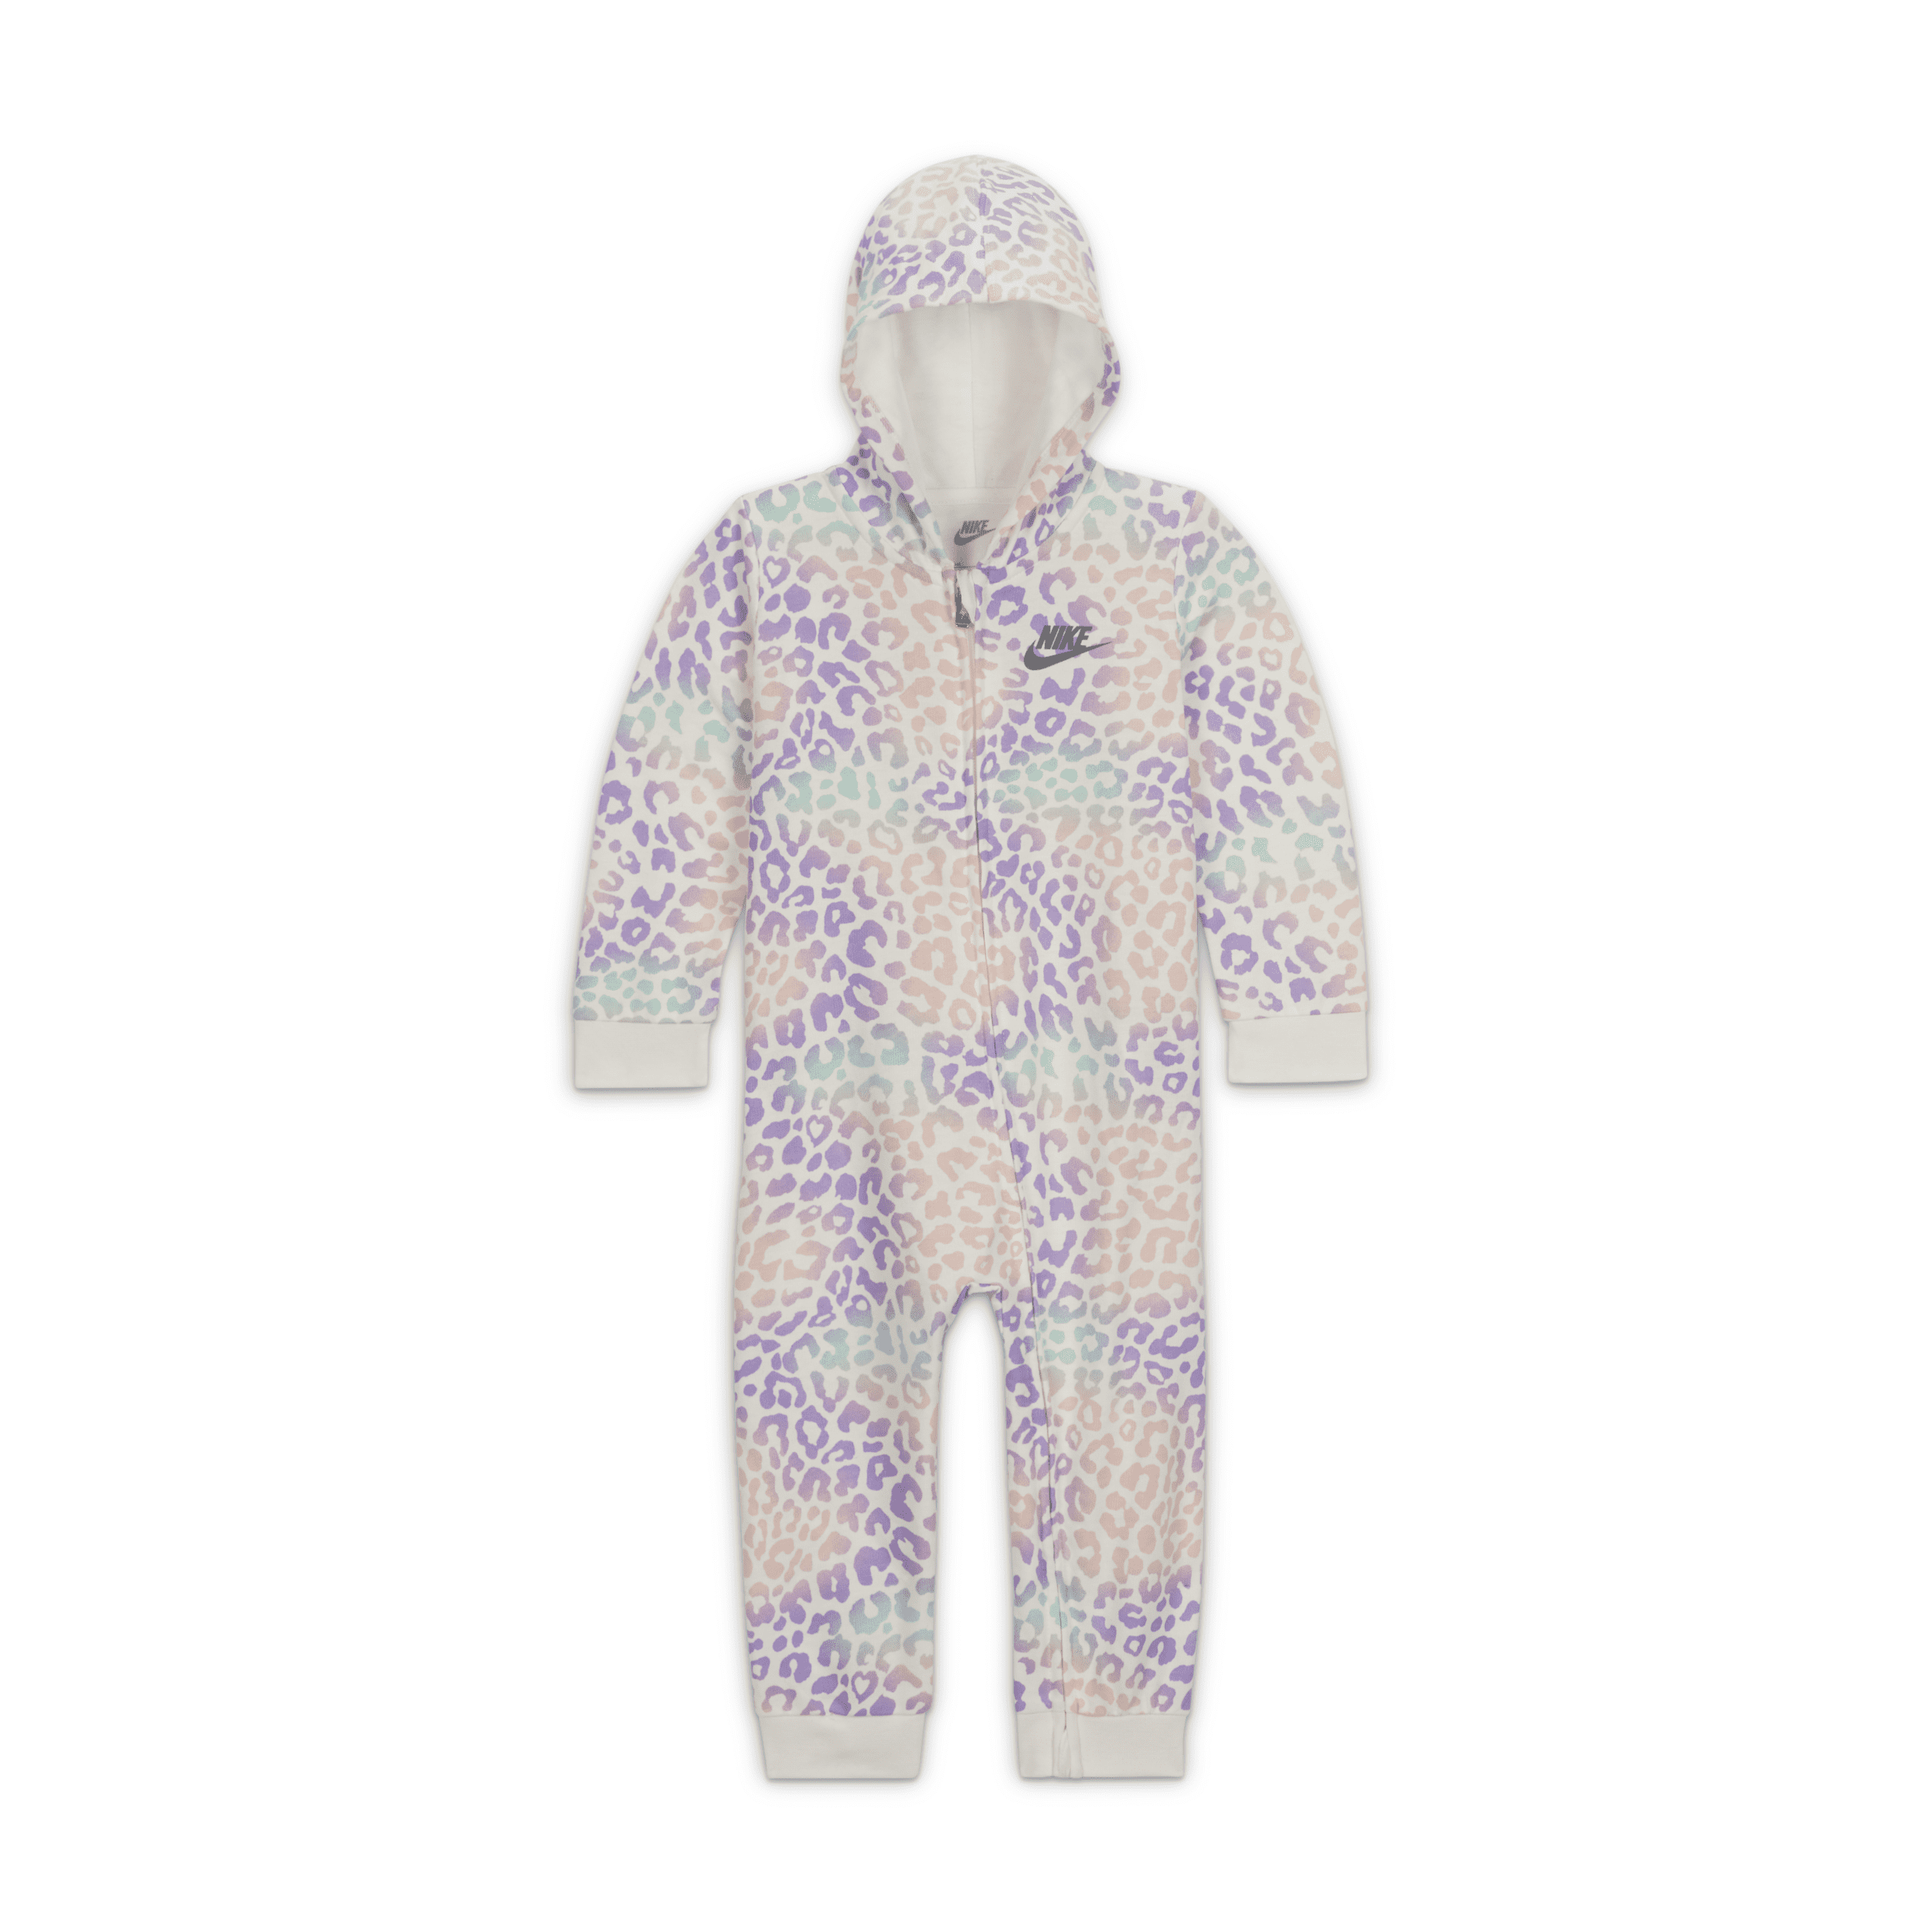 Nike Hooded Printed Coverall Baby (12-24m) Coverall In White